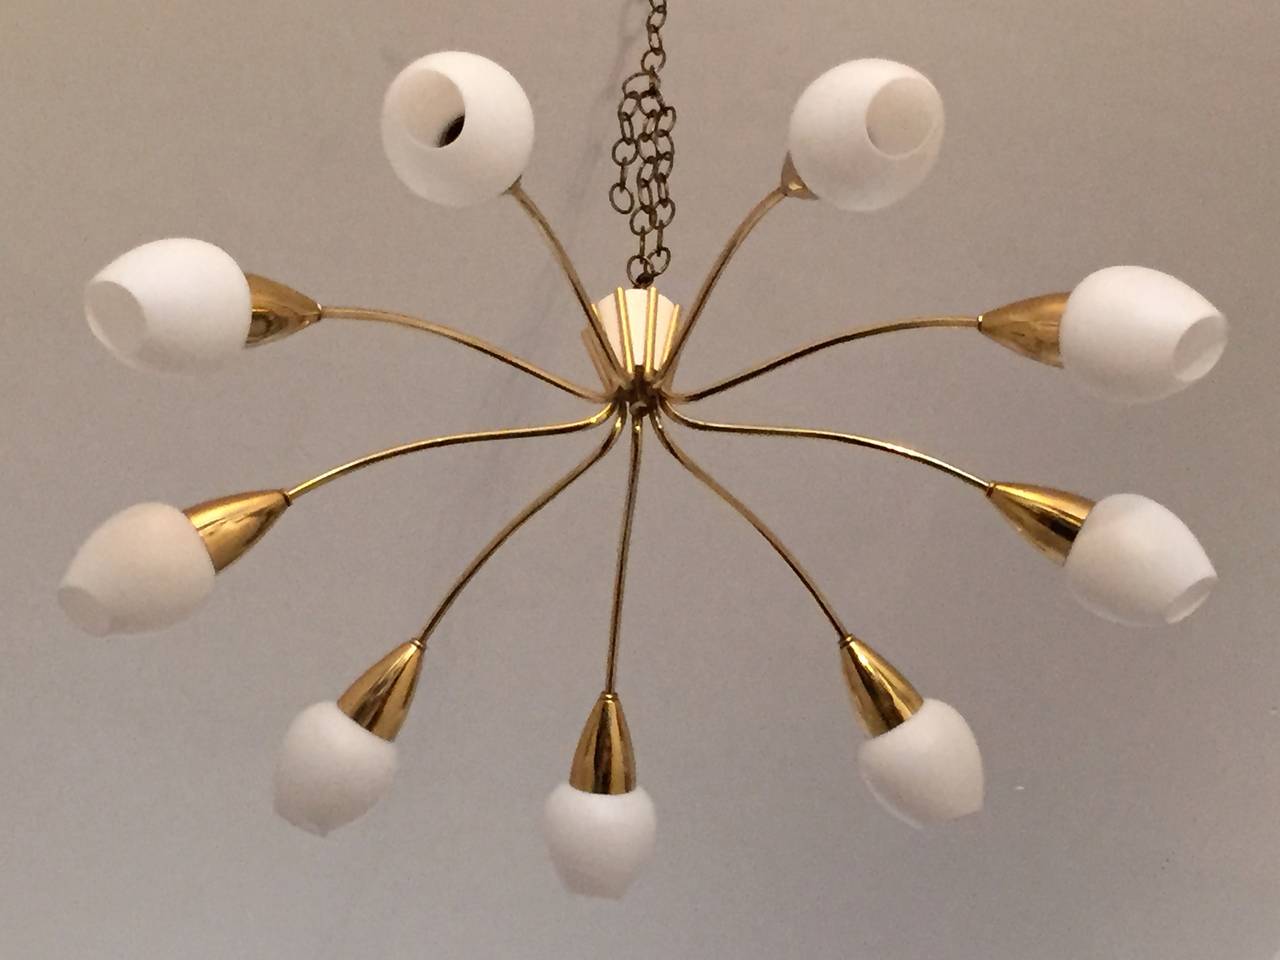 A wonderful pair of matching 1950s Italian, Mid-Century ceiling mounted flush chandeliers composed of polished brass fixtures with whited frosted tulip glass shades. Rewired. A pole can be provided to make them as hanging pendants if needed.